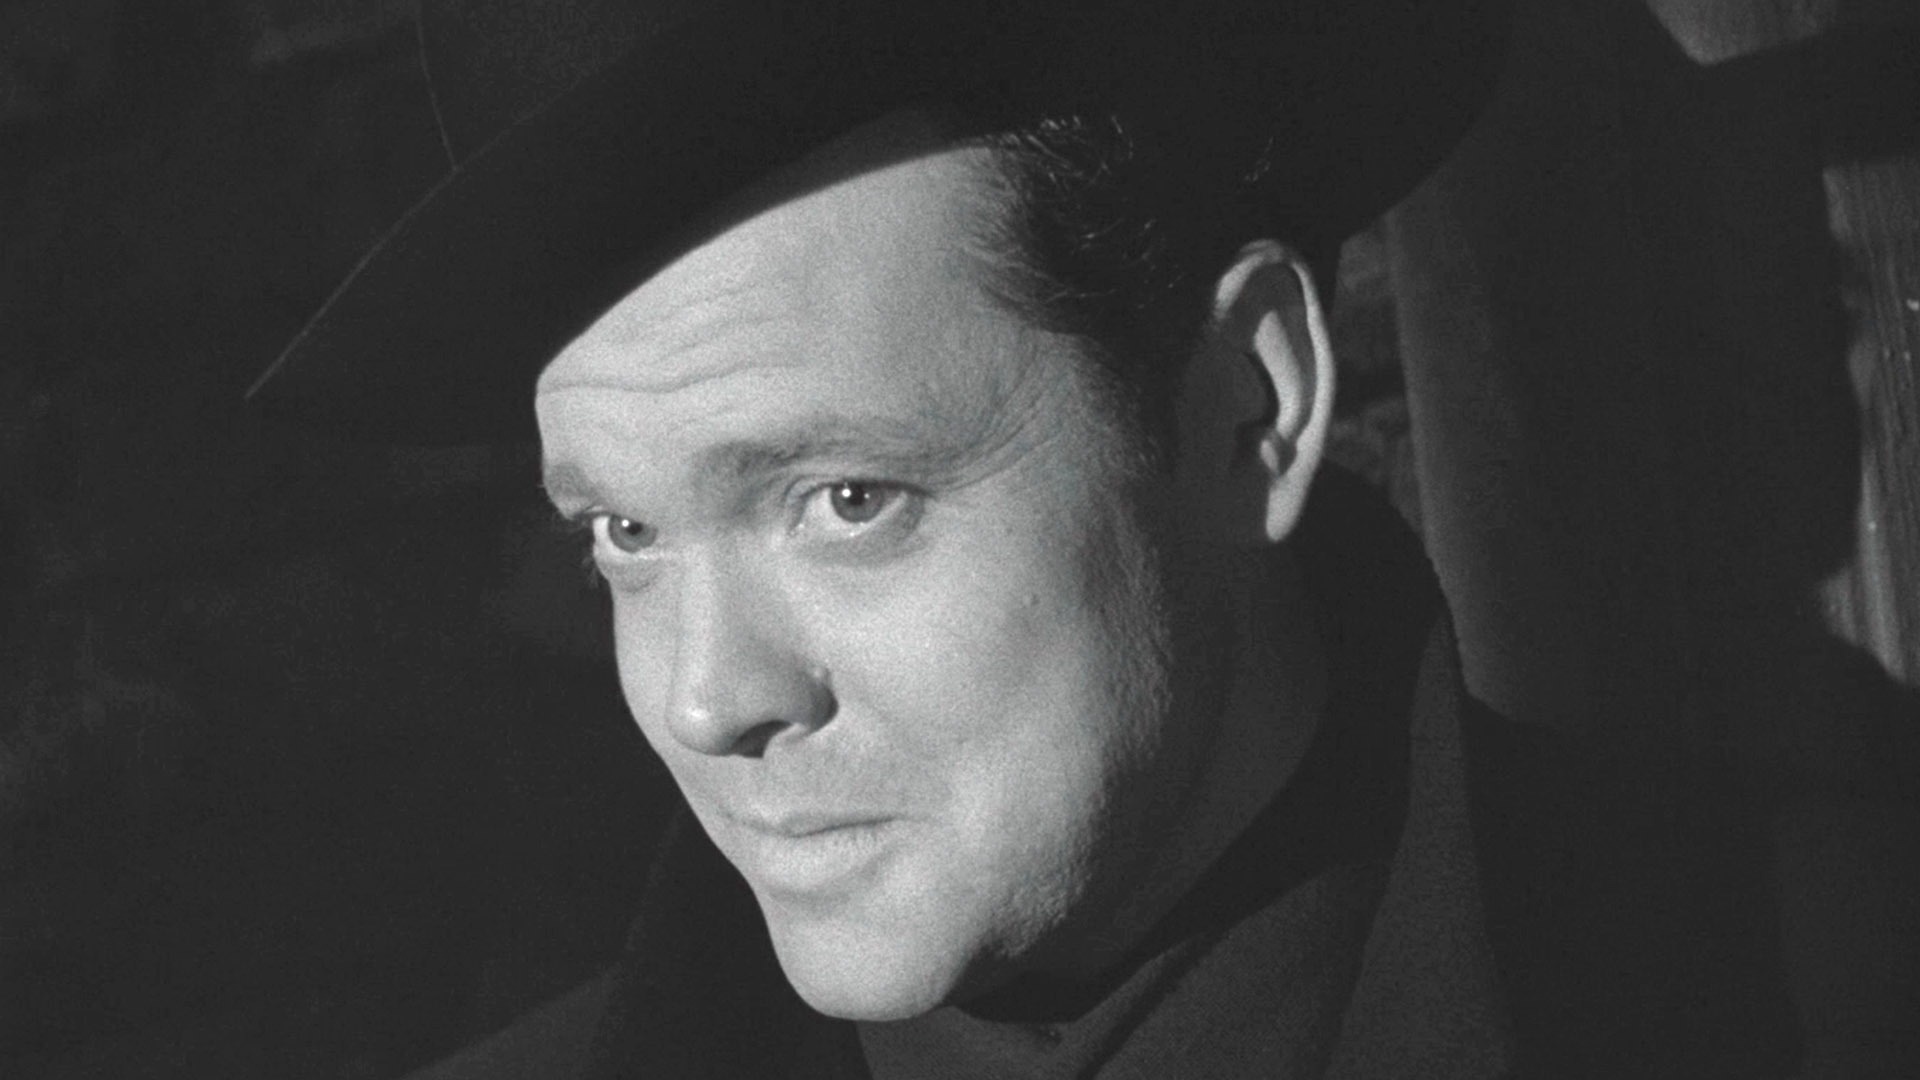 Orson Welles as Harry Lime smirking in The Third Man.